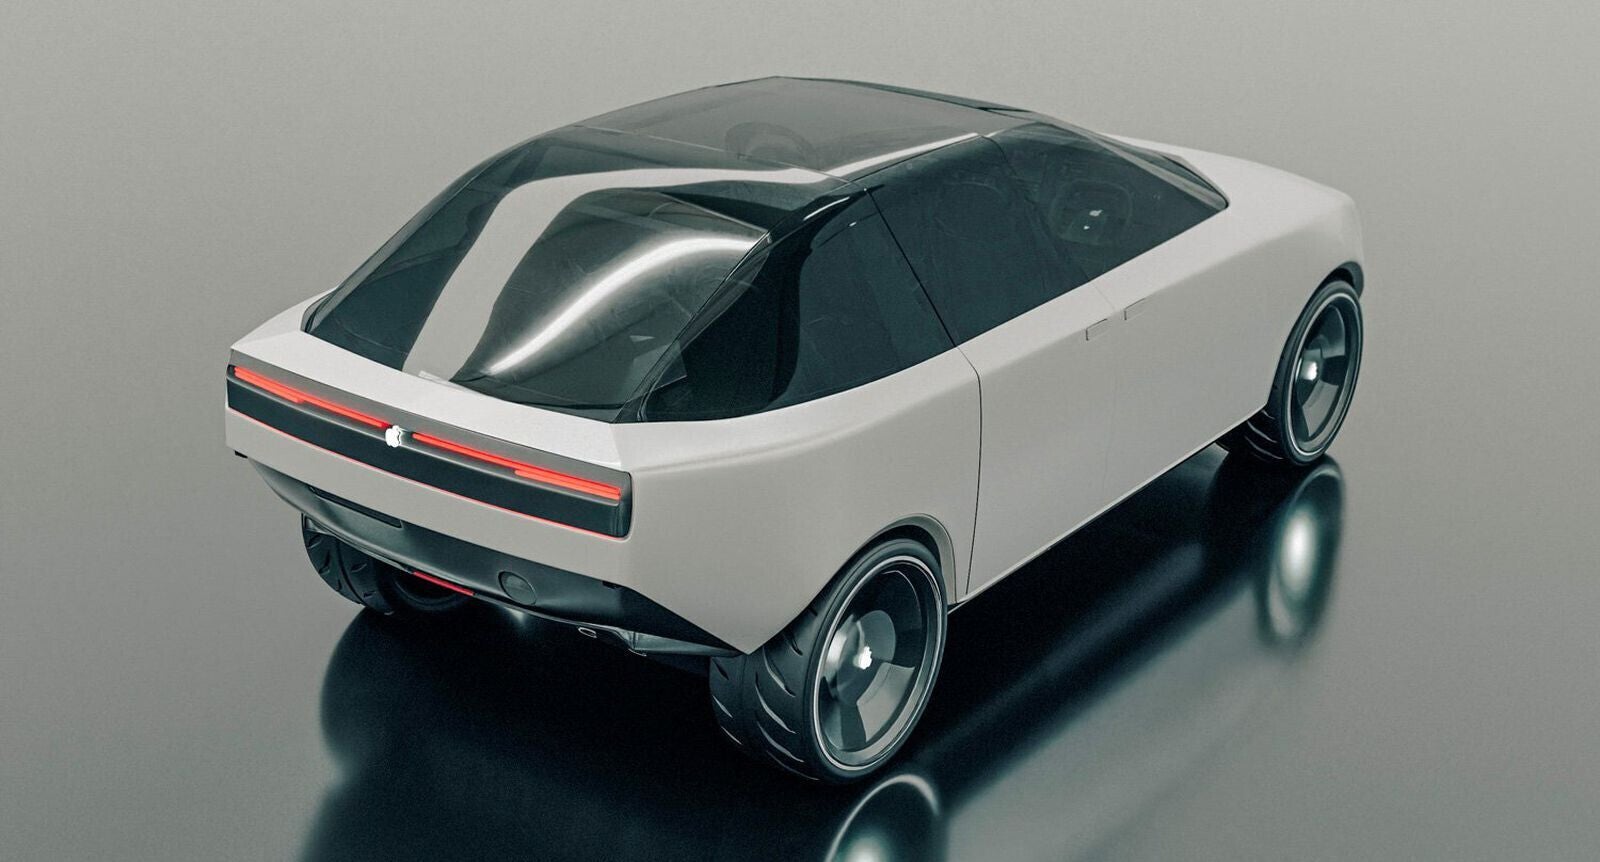 A patent based render for a possible Apple Car design - Apple Car inches towards reality as a new report indicates a test autopilot chip order